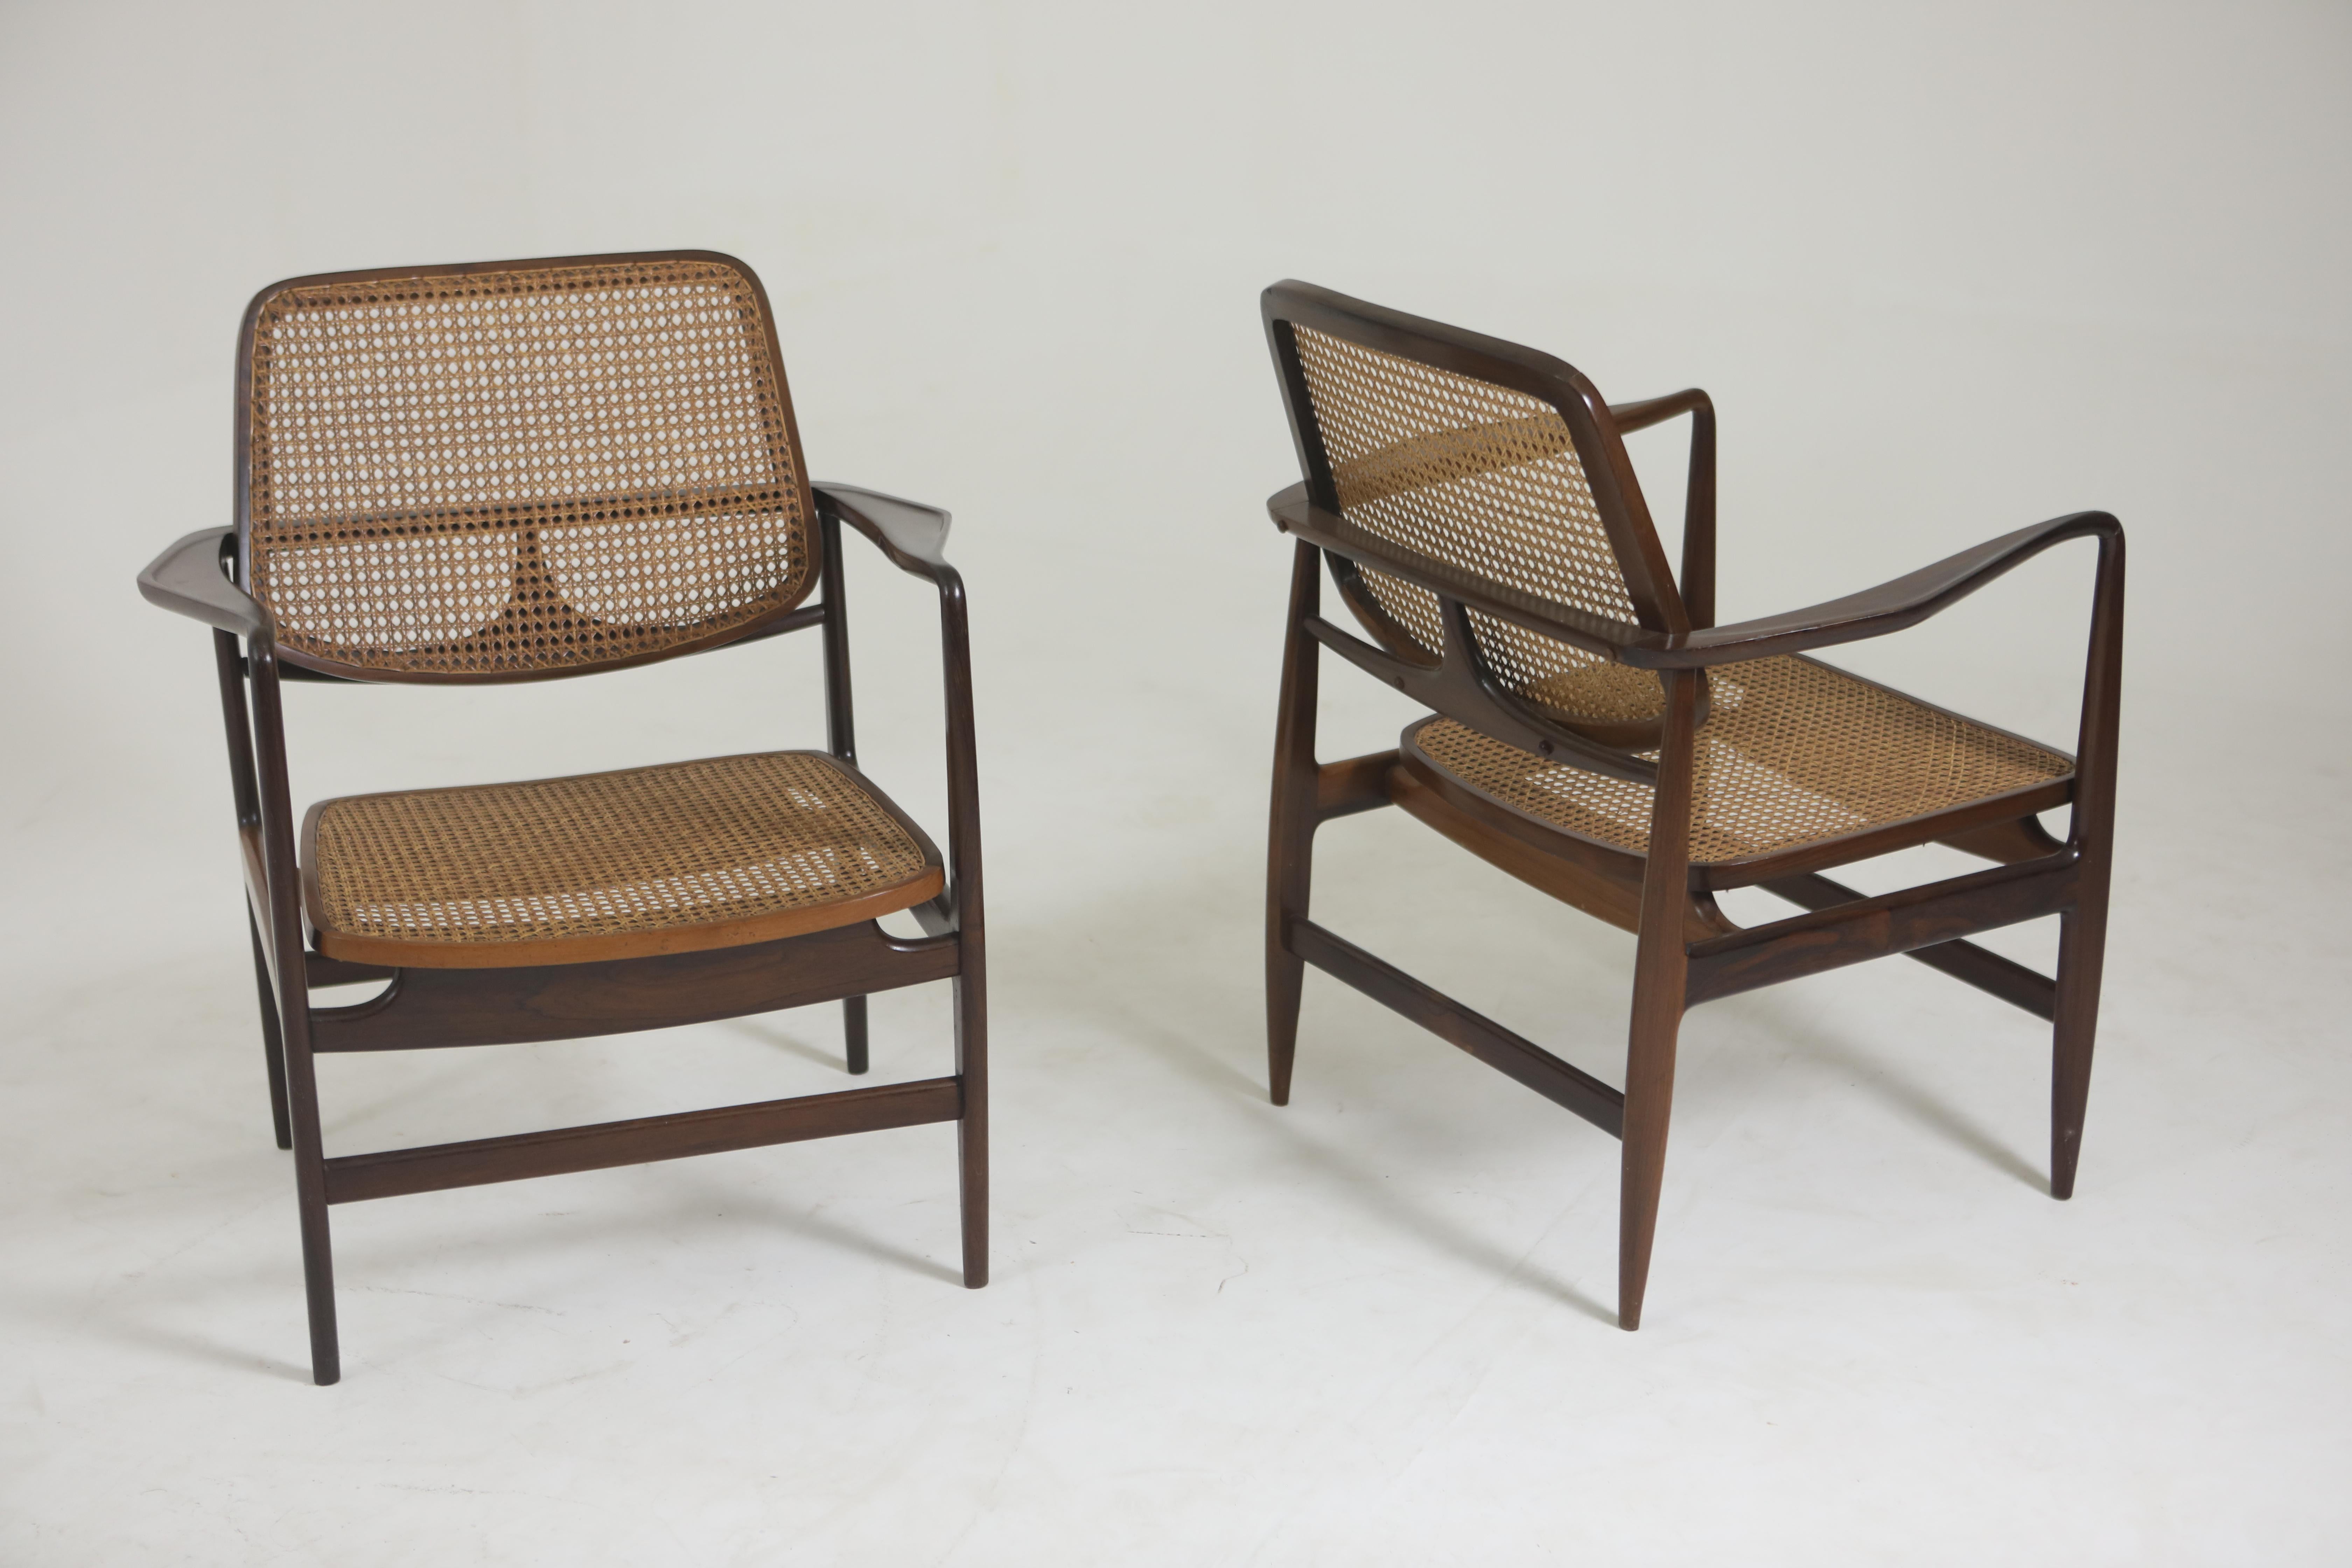 Brazilian Set of Two Mid-Century Modern Oscar Armchairs by Sergio Rodrigues, Brazil, 1956